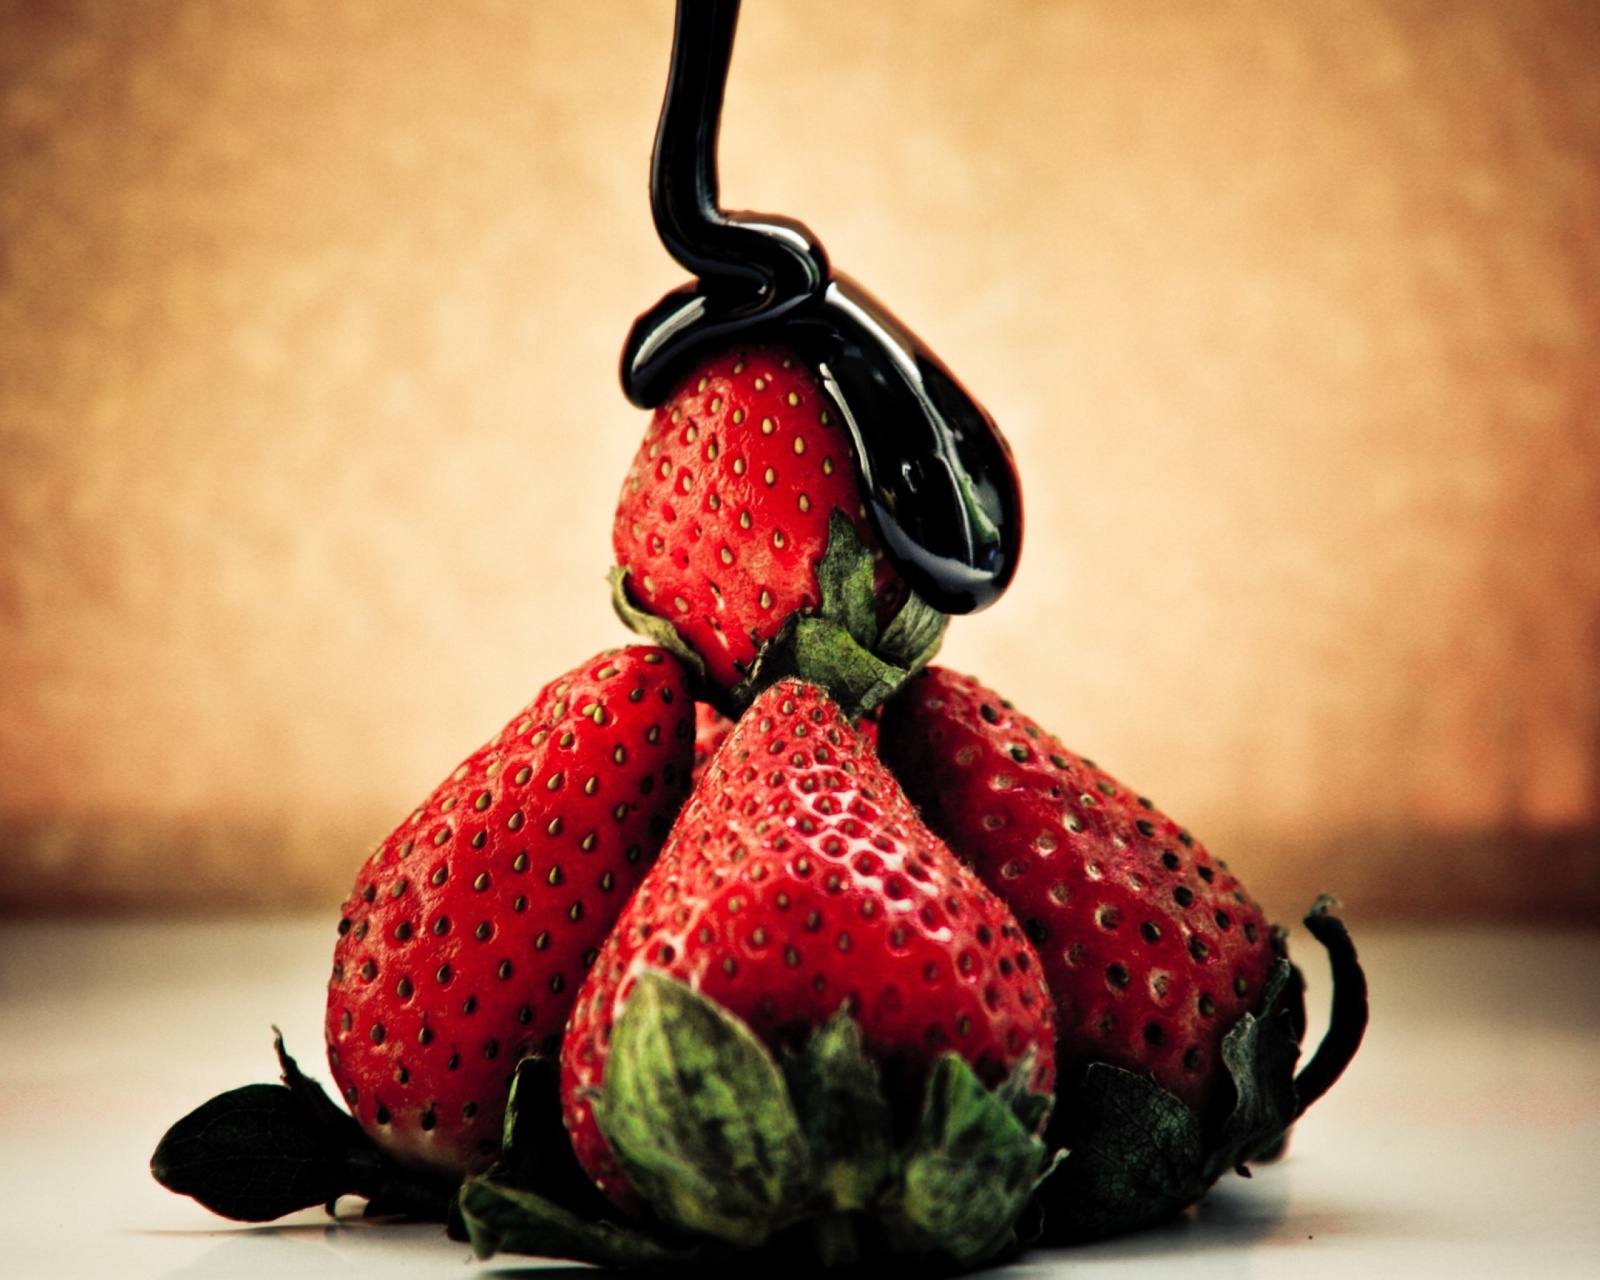 Das Strawberries with chocolate Wallpaper 1600x1280